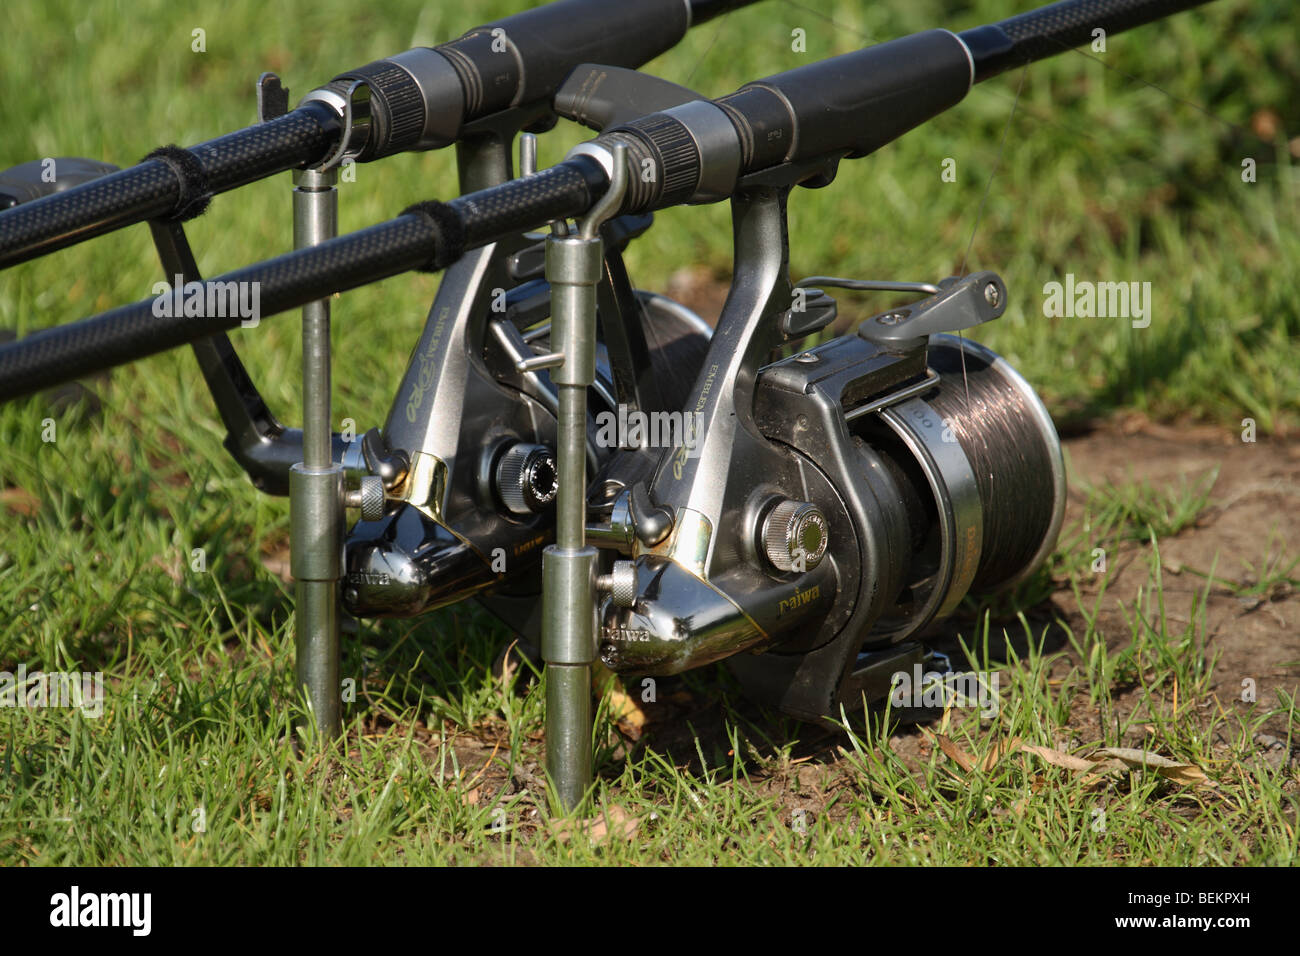 Close-up of shiny metal reels of pair of fishing rods on stands